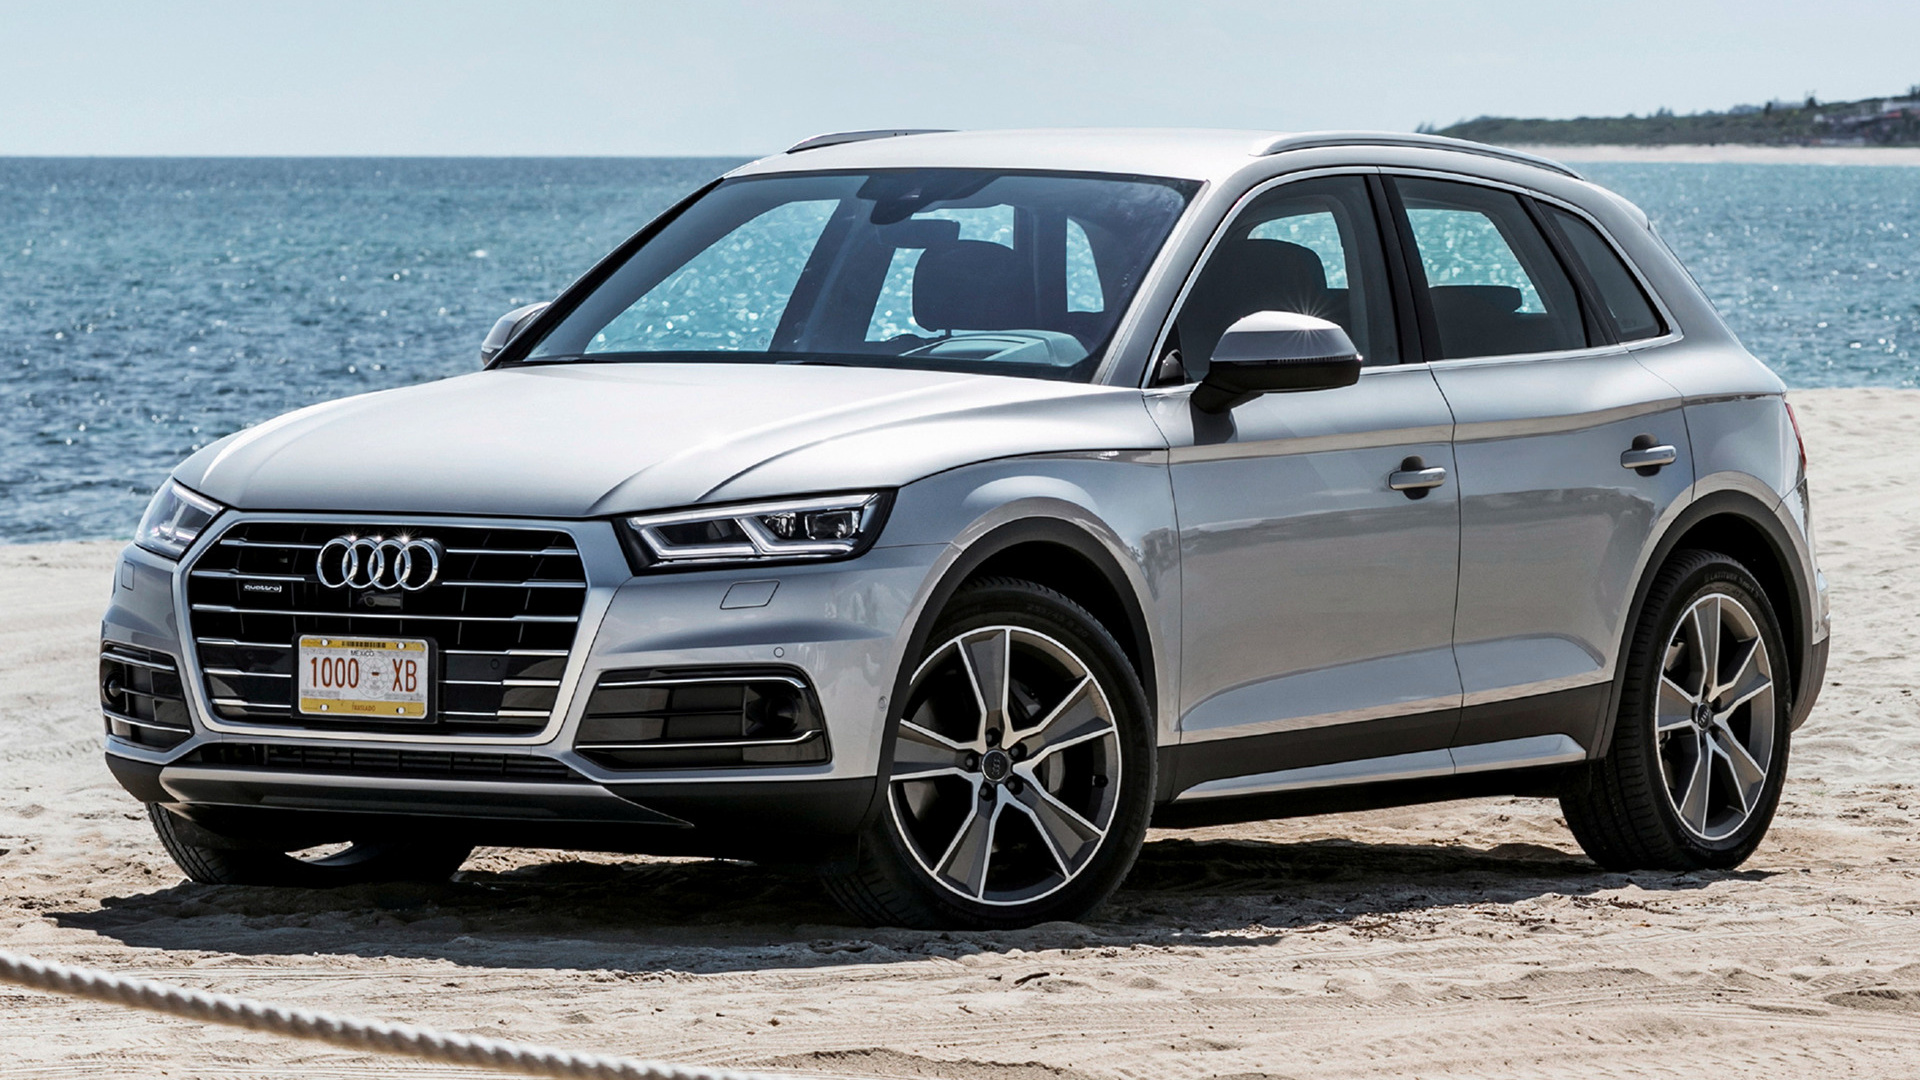 2017 Audi Q5 - Wallpapers and HD Images | Car Pixel